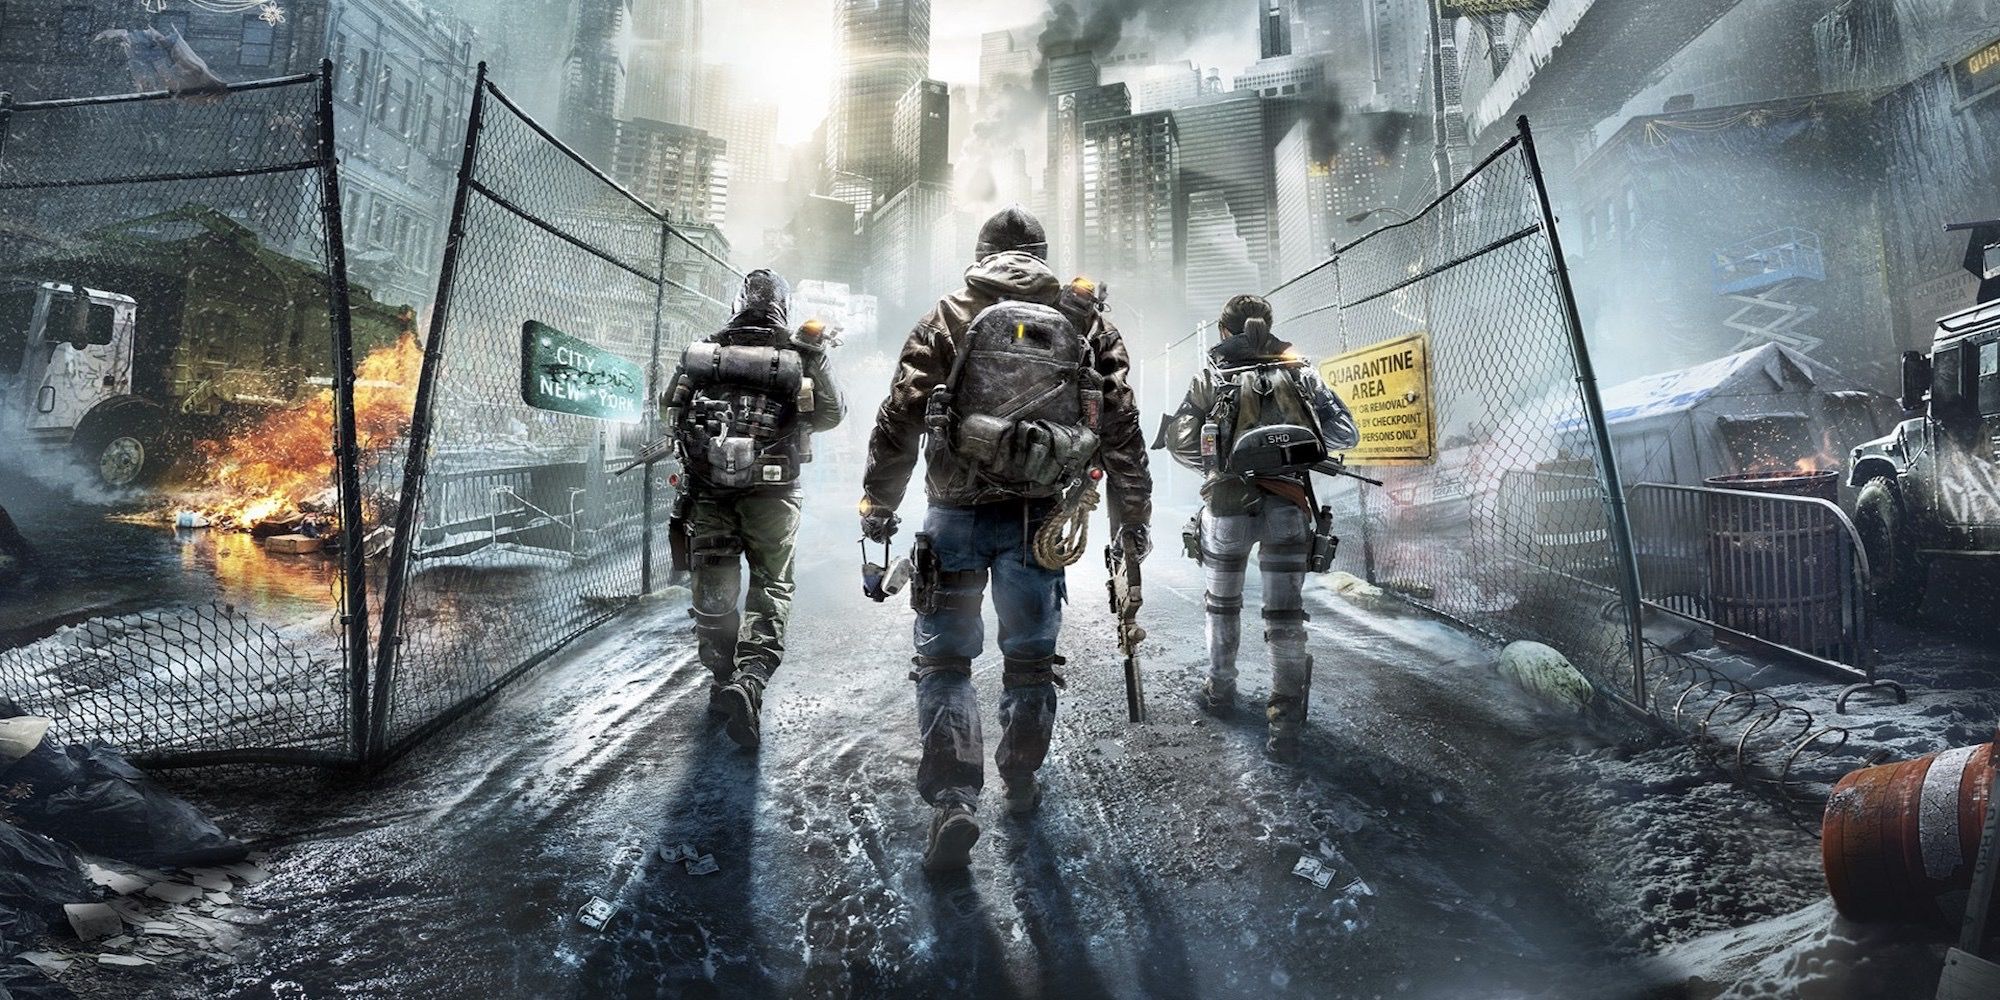 Promo art featuring characters in Tom Clancy's The Division